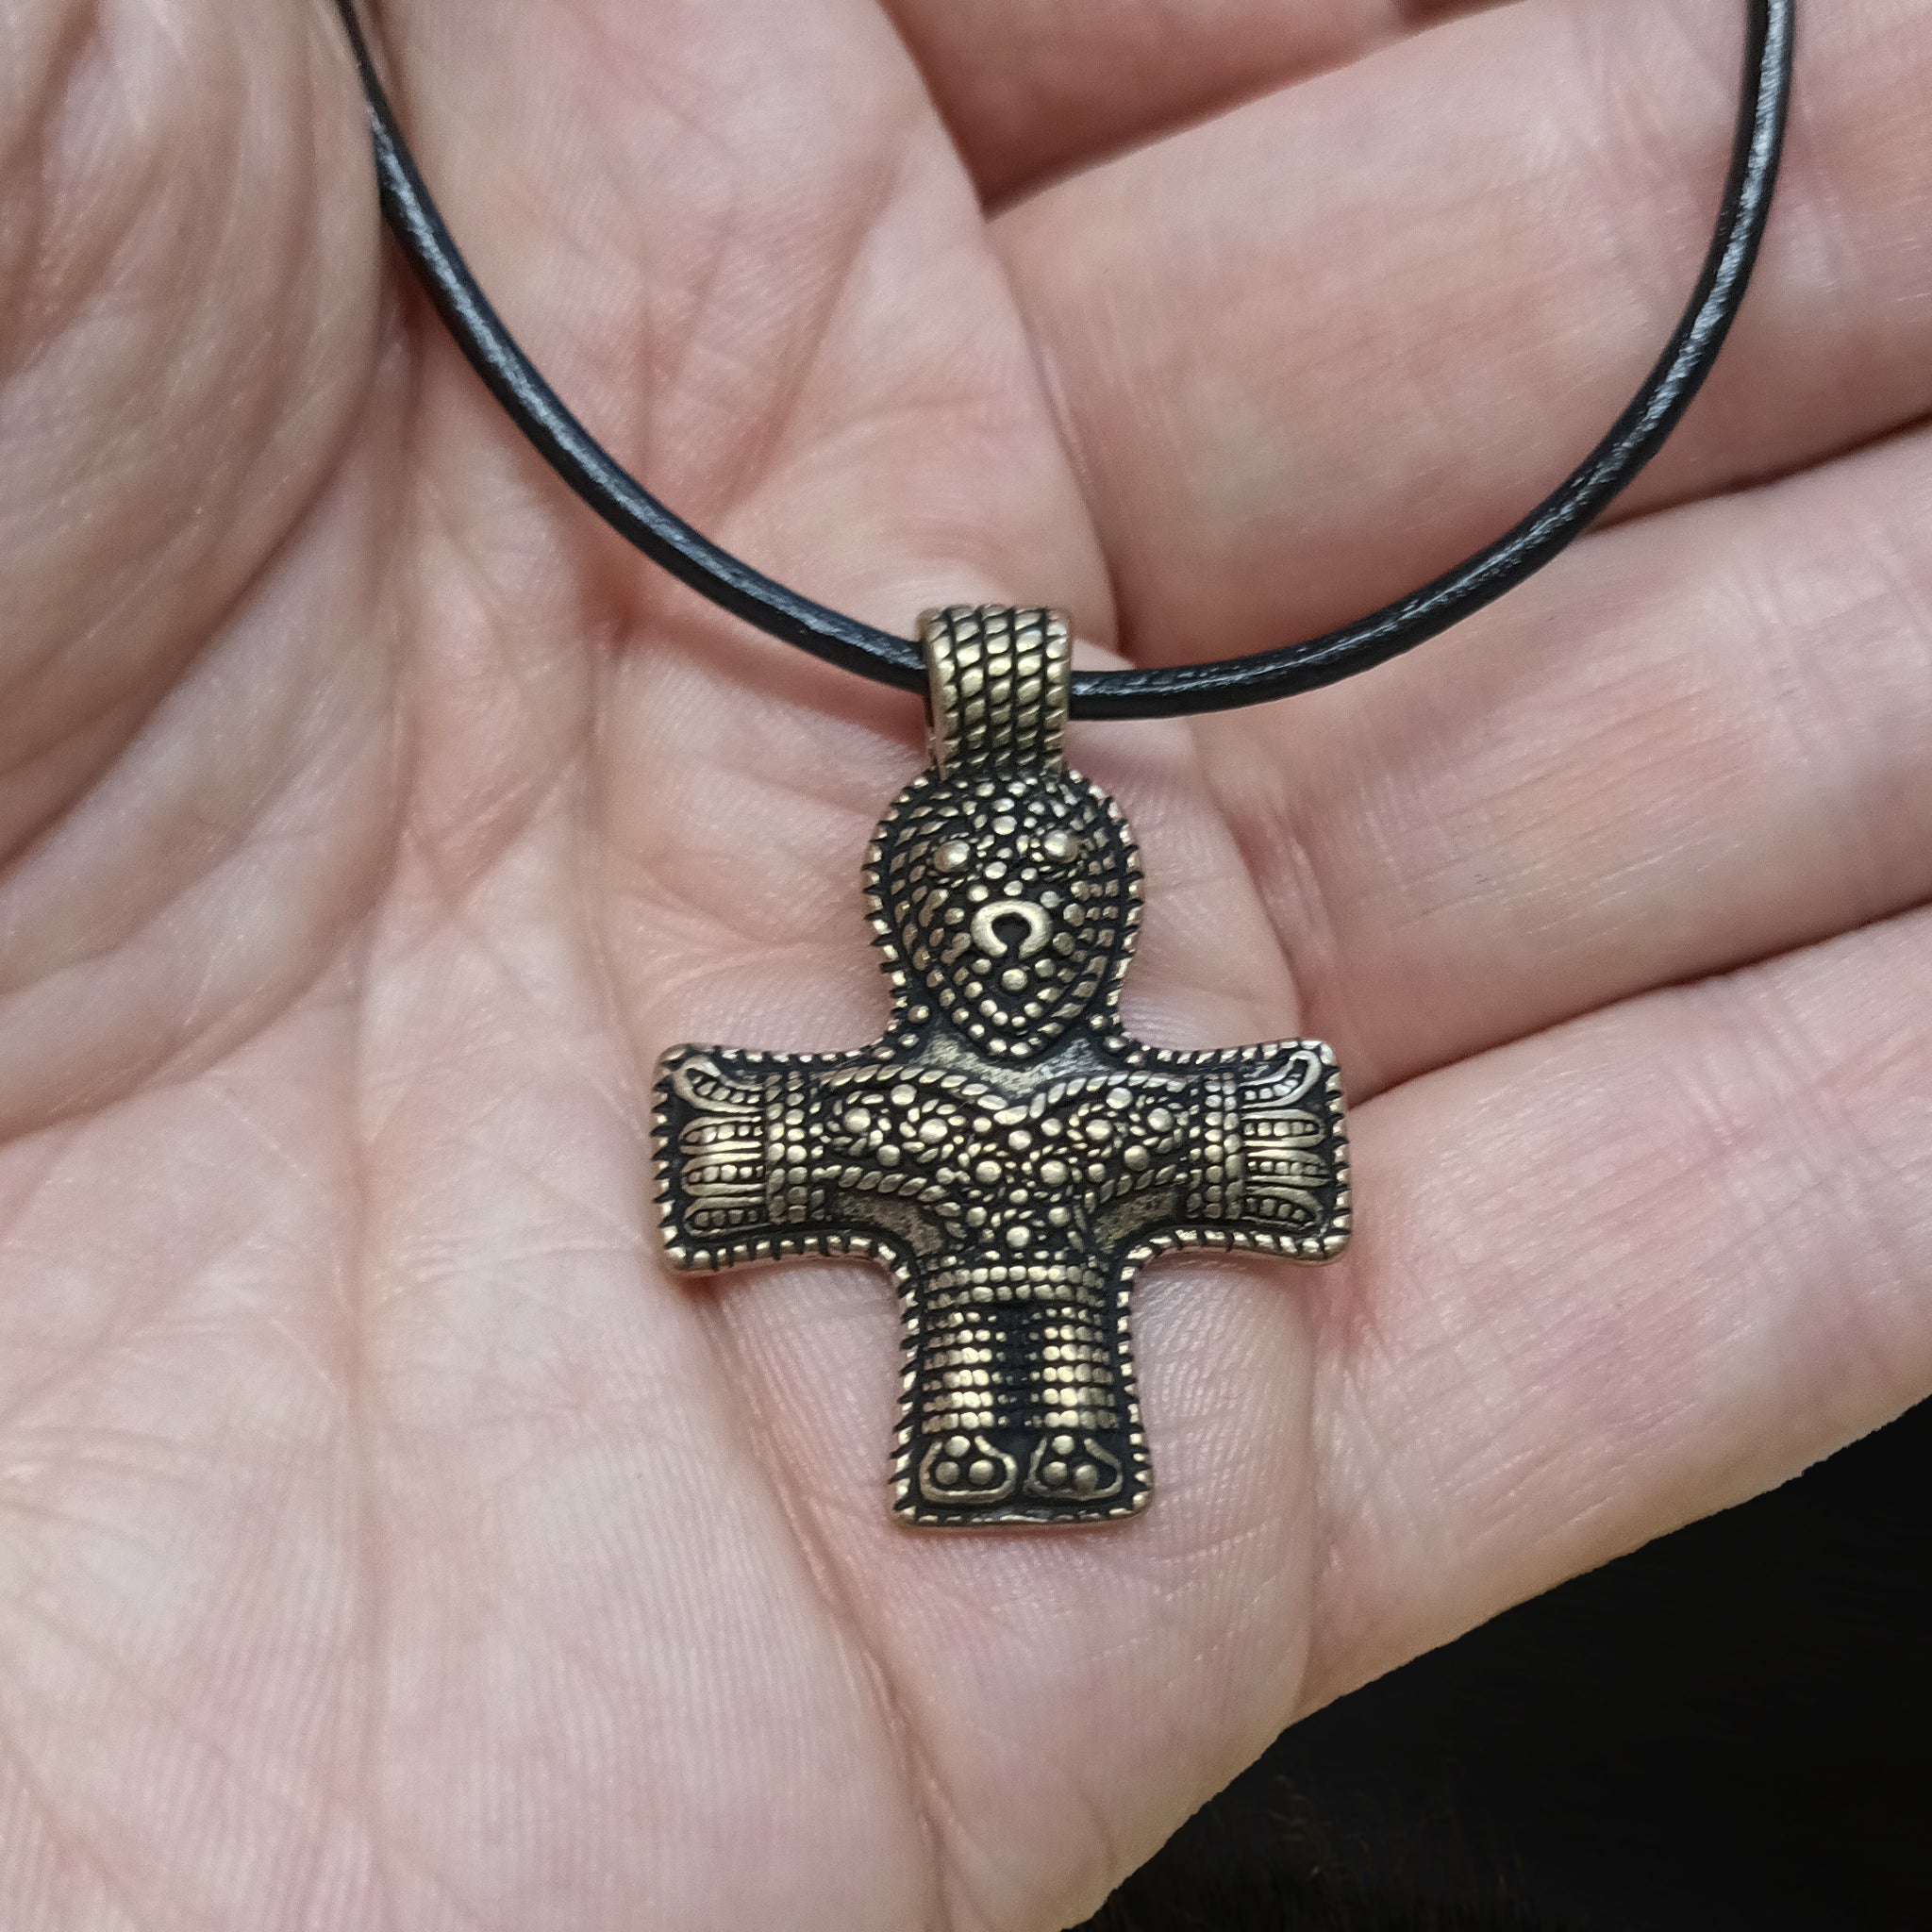 Bronze Crucifix Pendant from Denmark on Leather Thong on Hand- Viking Jewelry